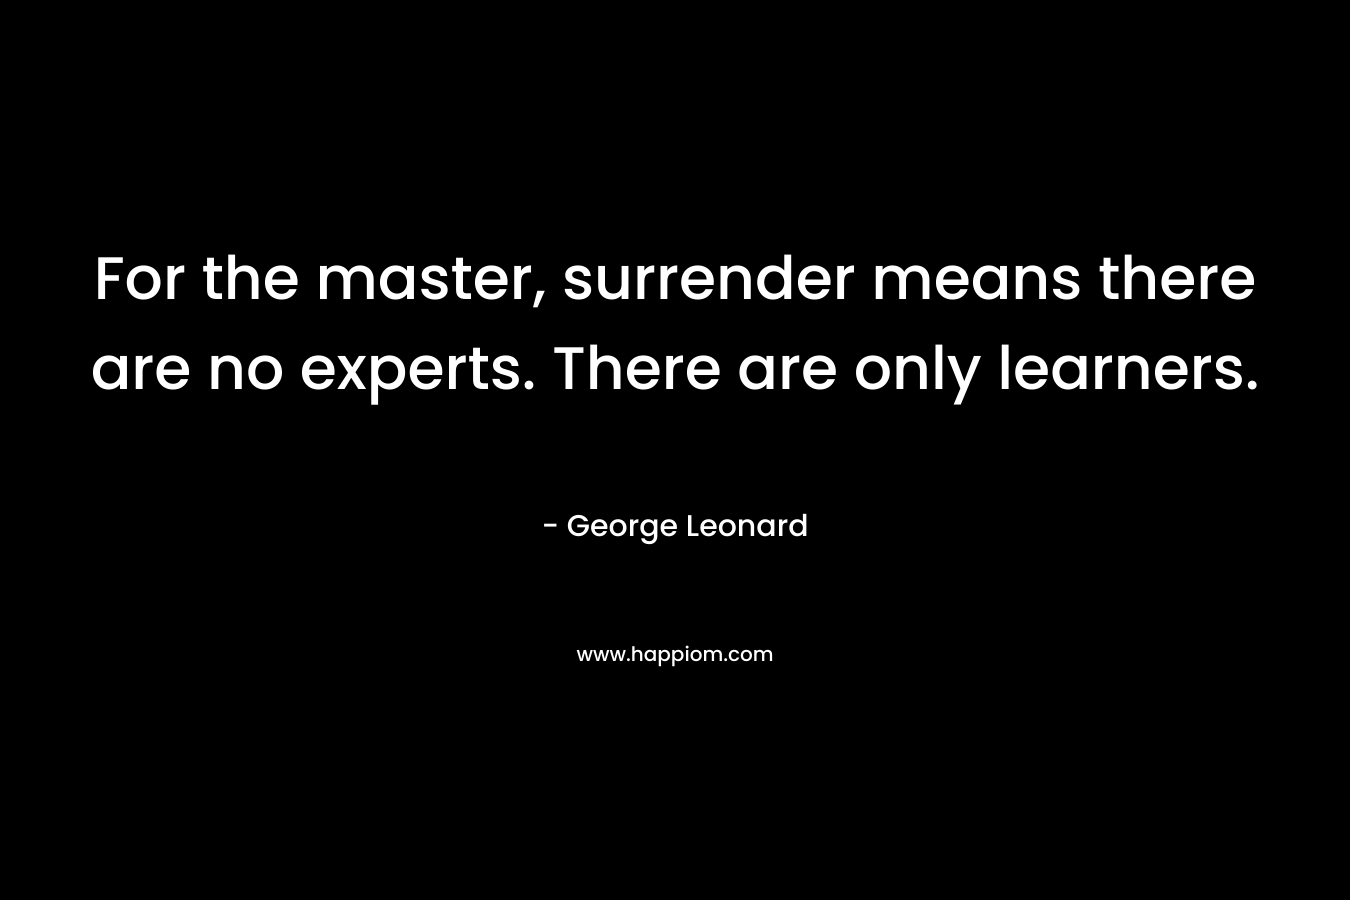 For the master, surrender means there are no experts. There are only learners.